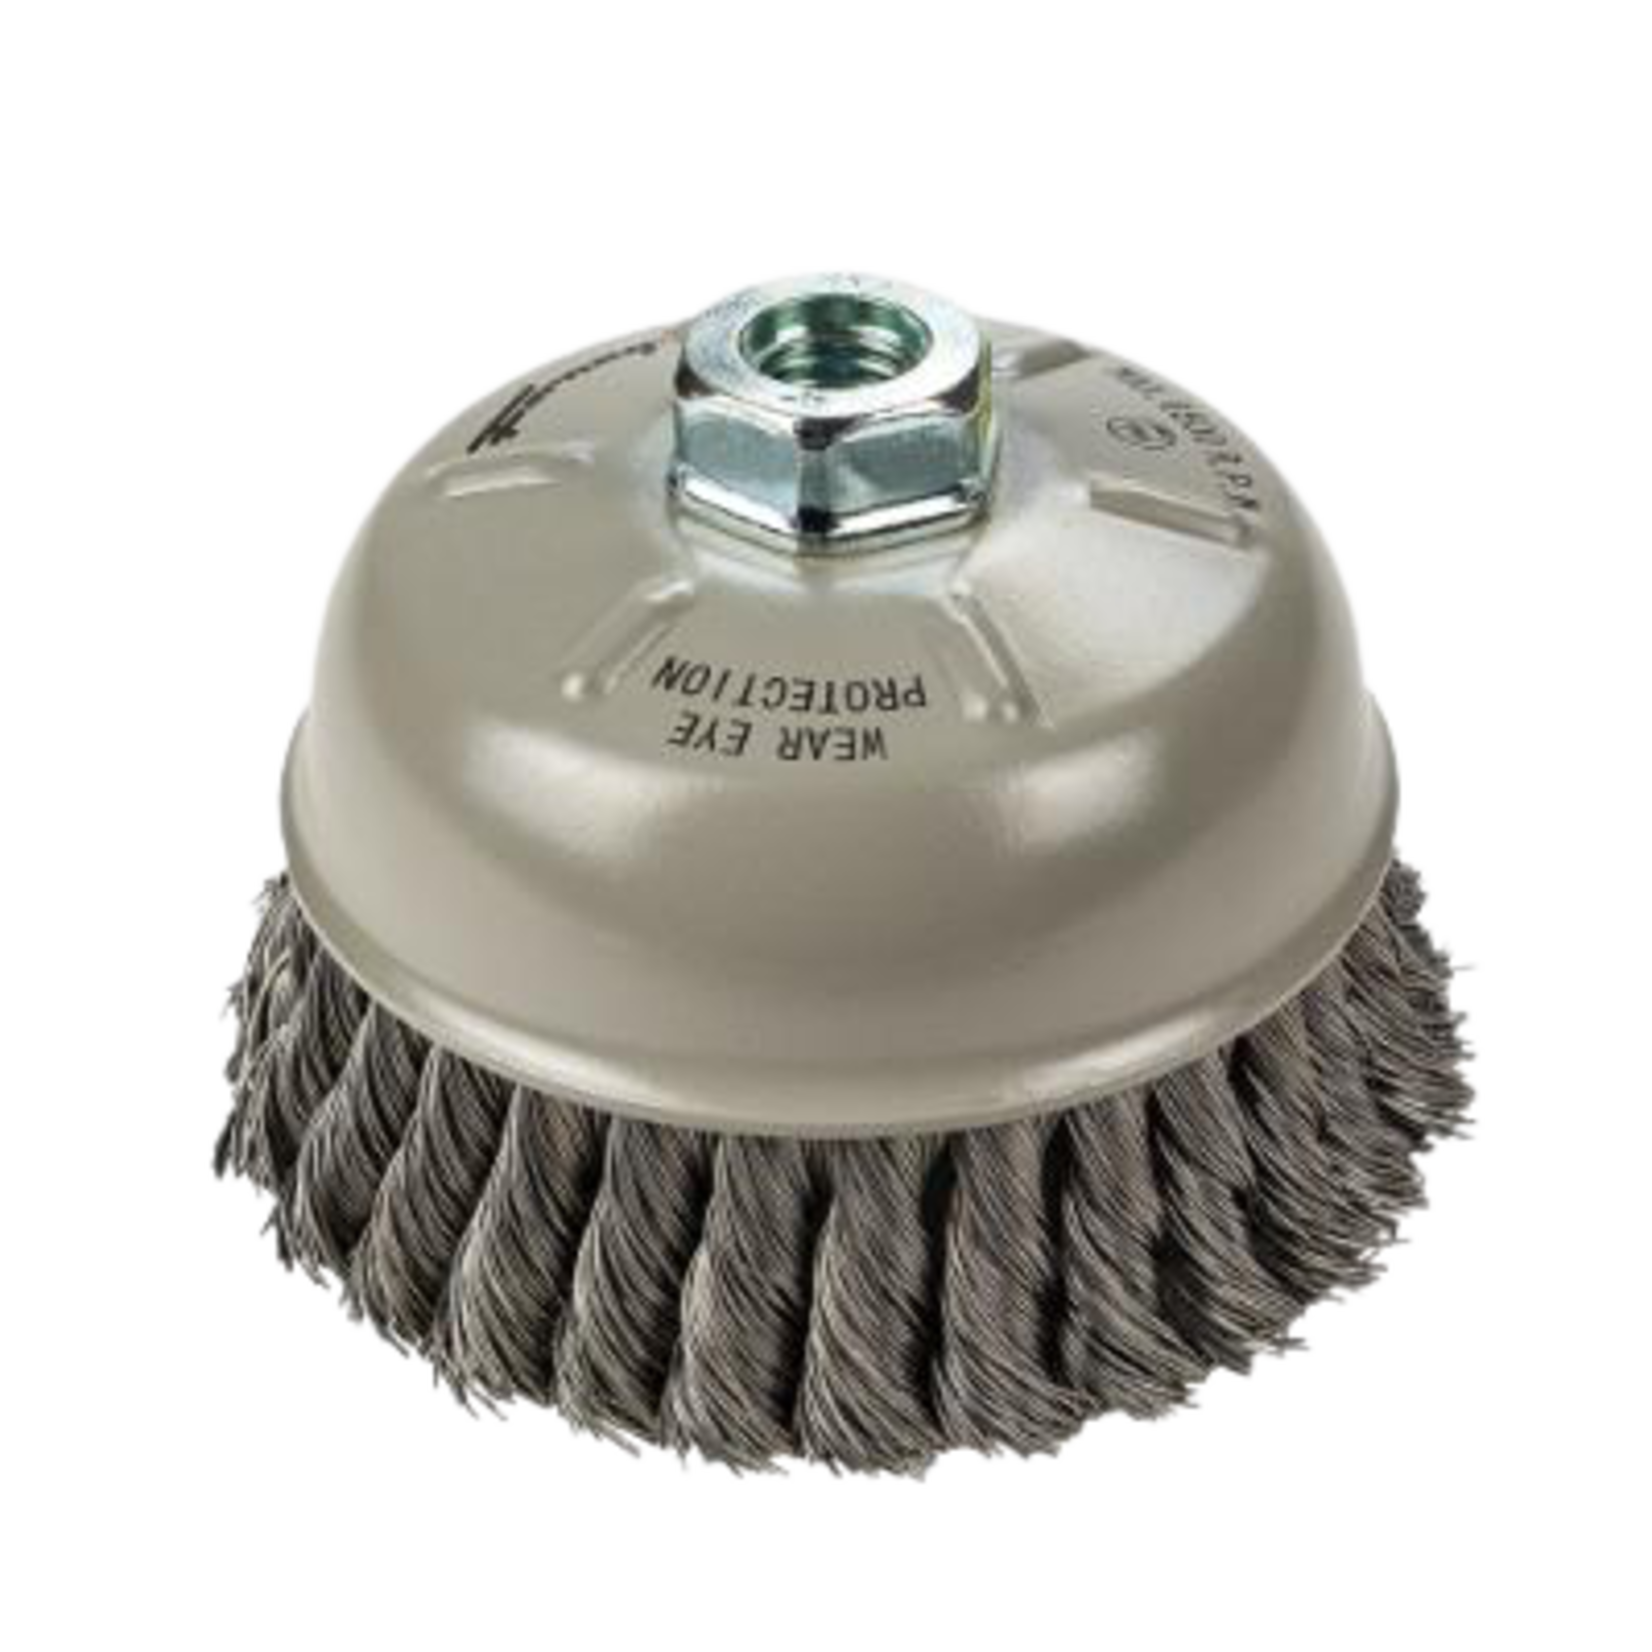 KT CUP BRUSH 6IN WITH 5/8IN-11NC